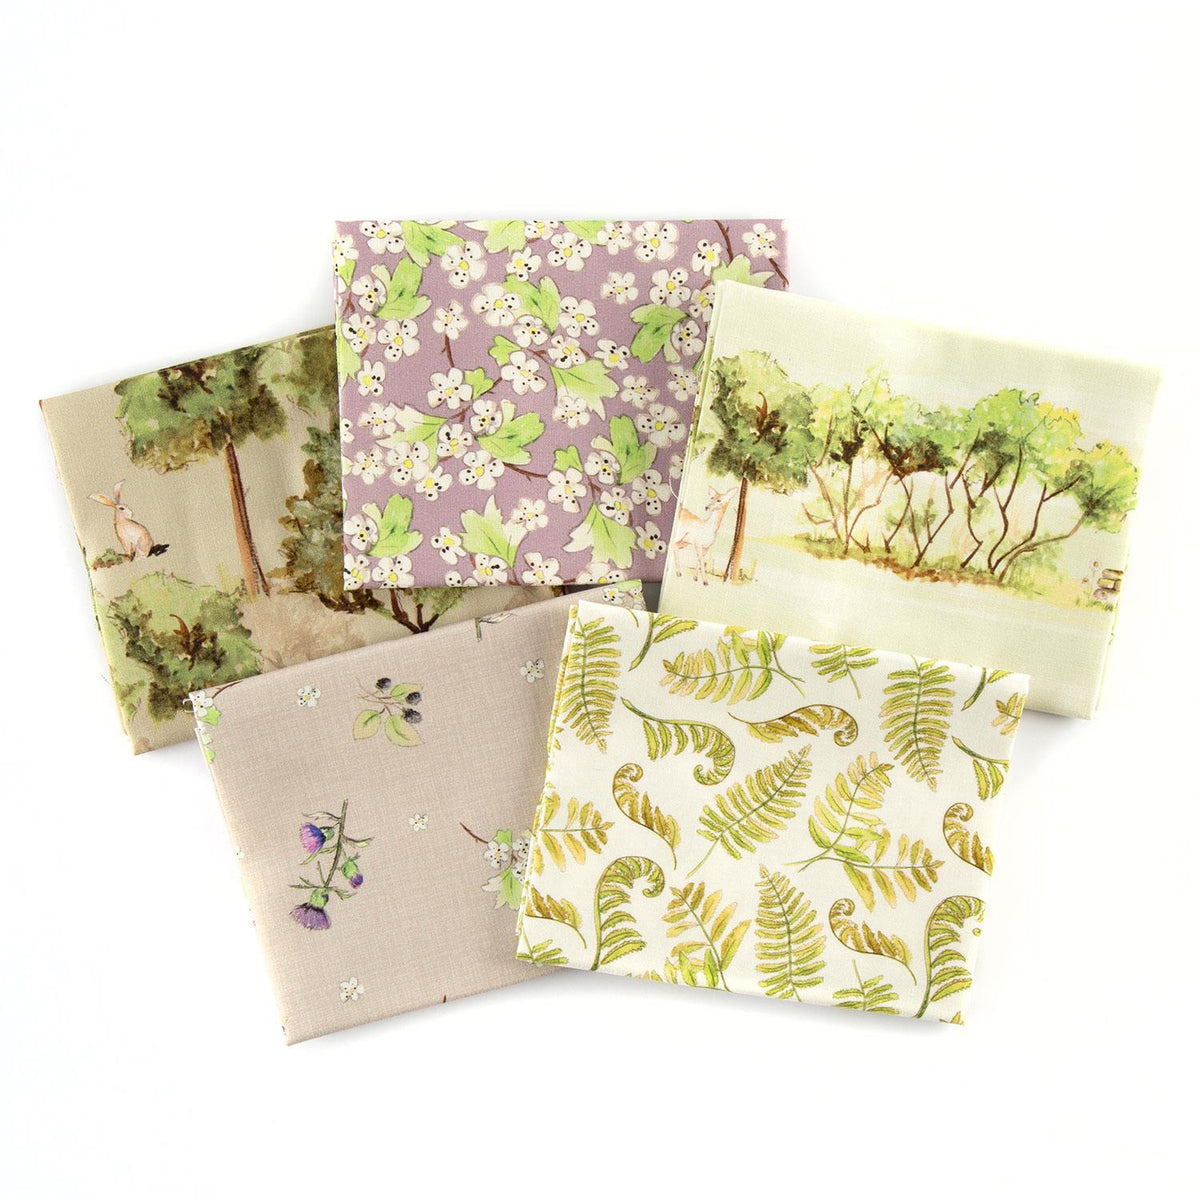 A Country Walk Animals by Debbie Shore Fat Quarters Pack of 5